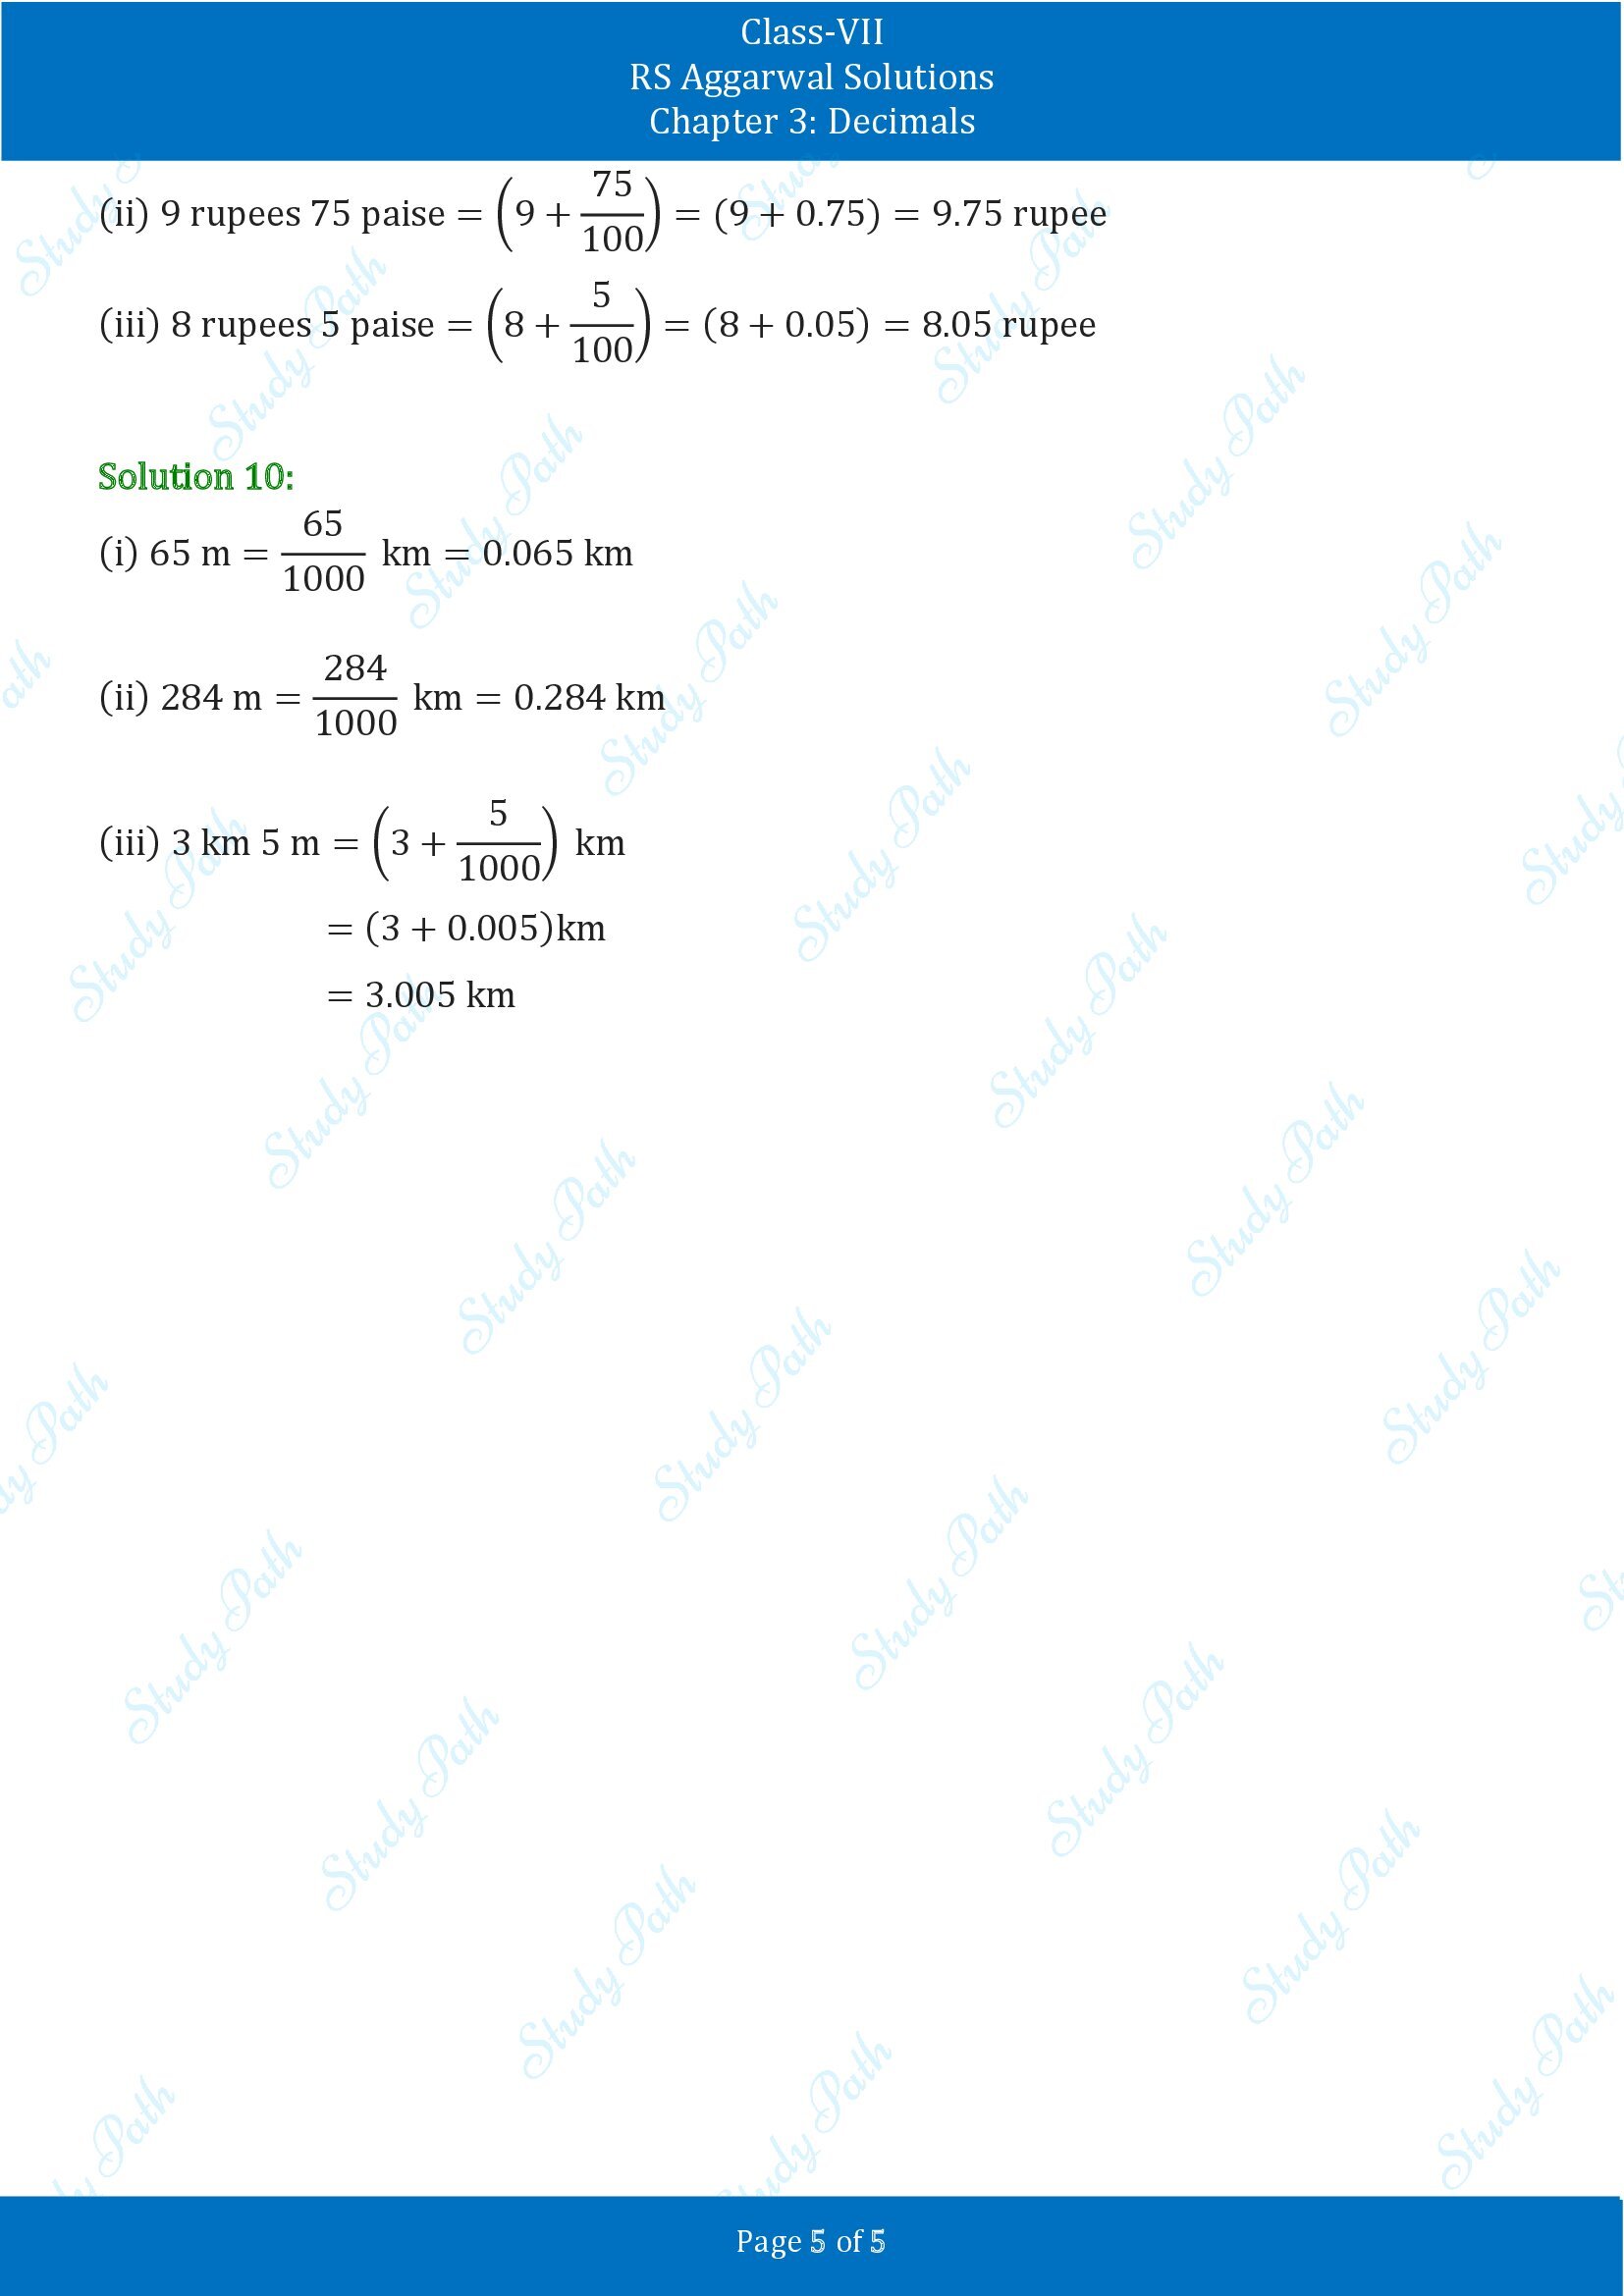 RS Aggarwal Solutions Class 7 Chapter 3 Decimals Exercise 3A 00005